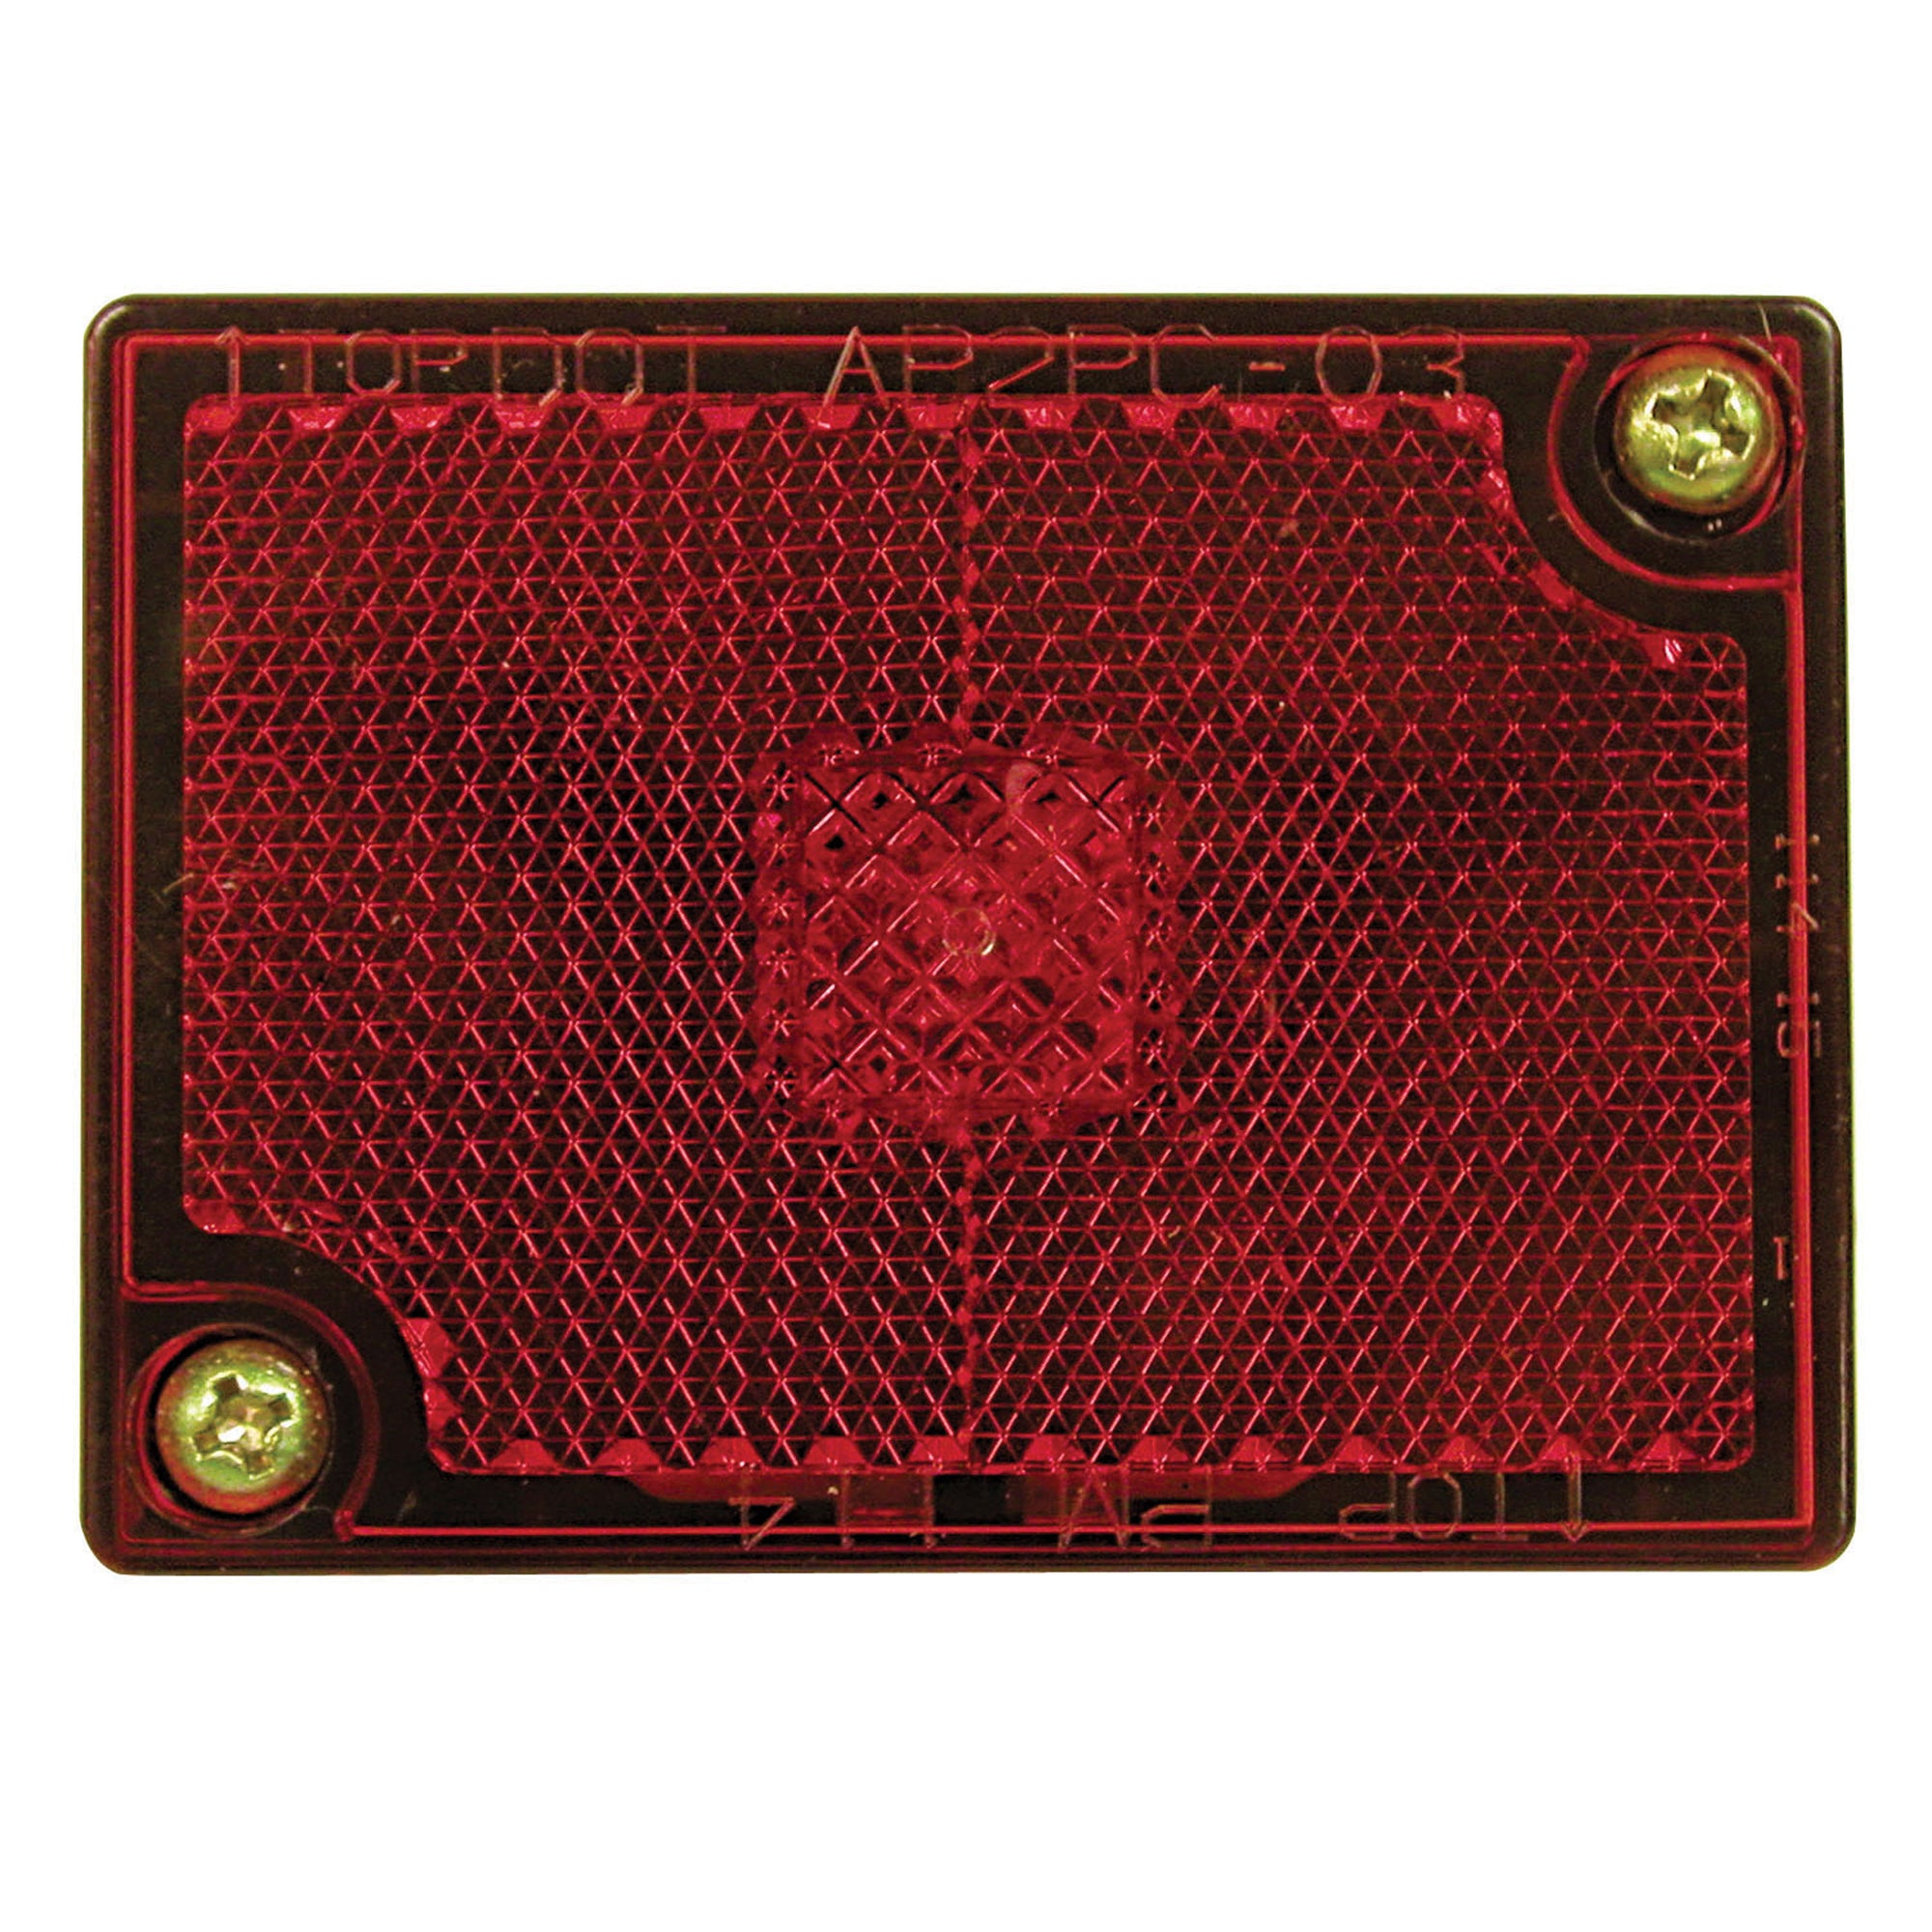 Peterson E114R Incandescent PC-Rated Rectangular Clearance/Side Marker Light with Reflex - Red, 2.75" x 2.05"